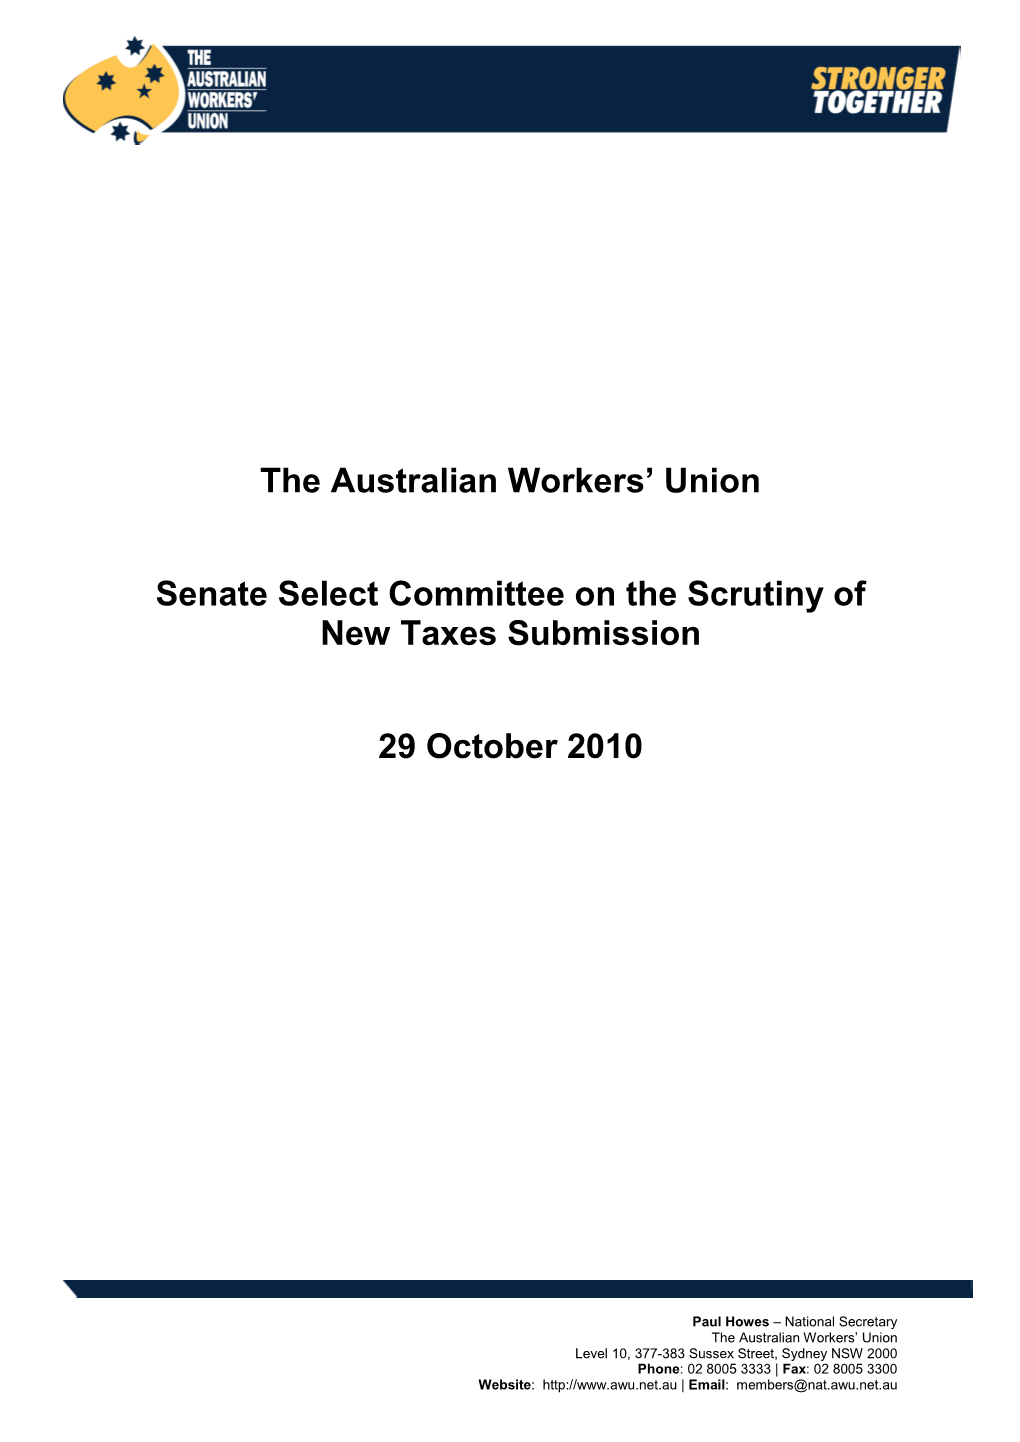 The Australian Workers' Union Senate Select Committee on the Scrutiny